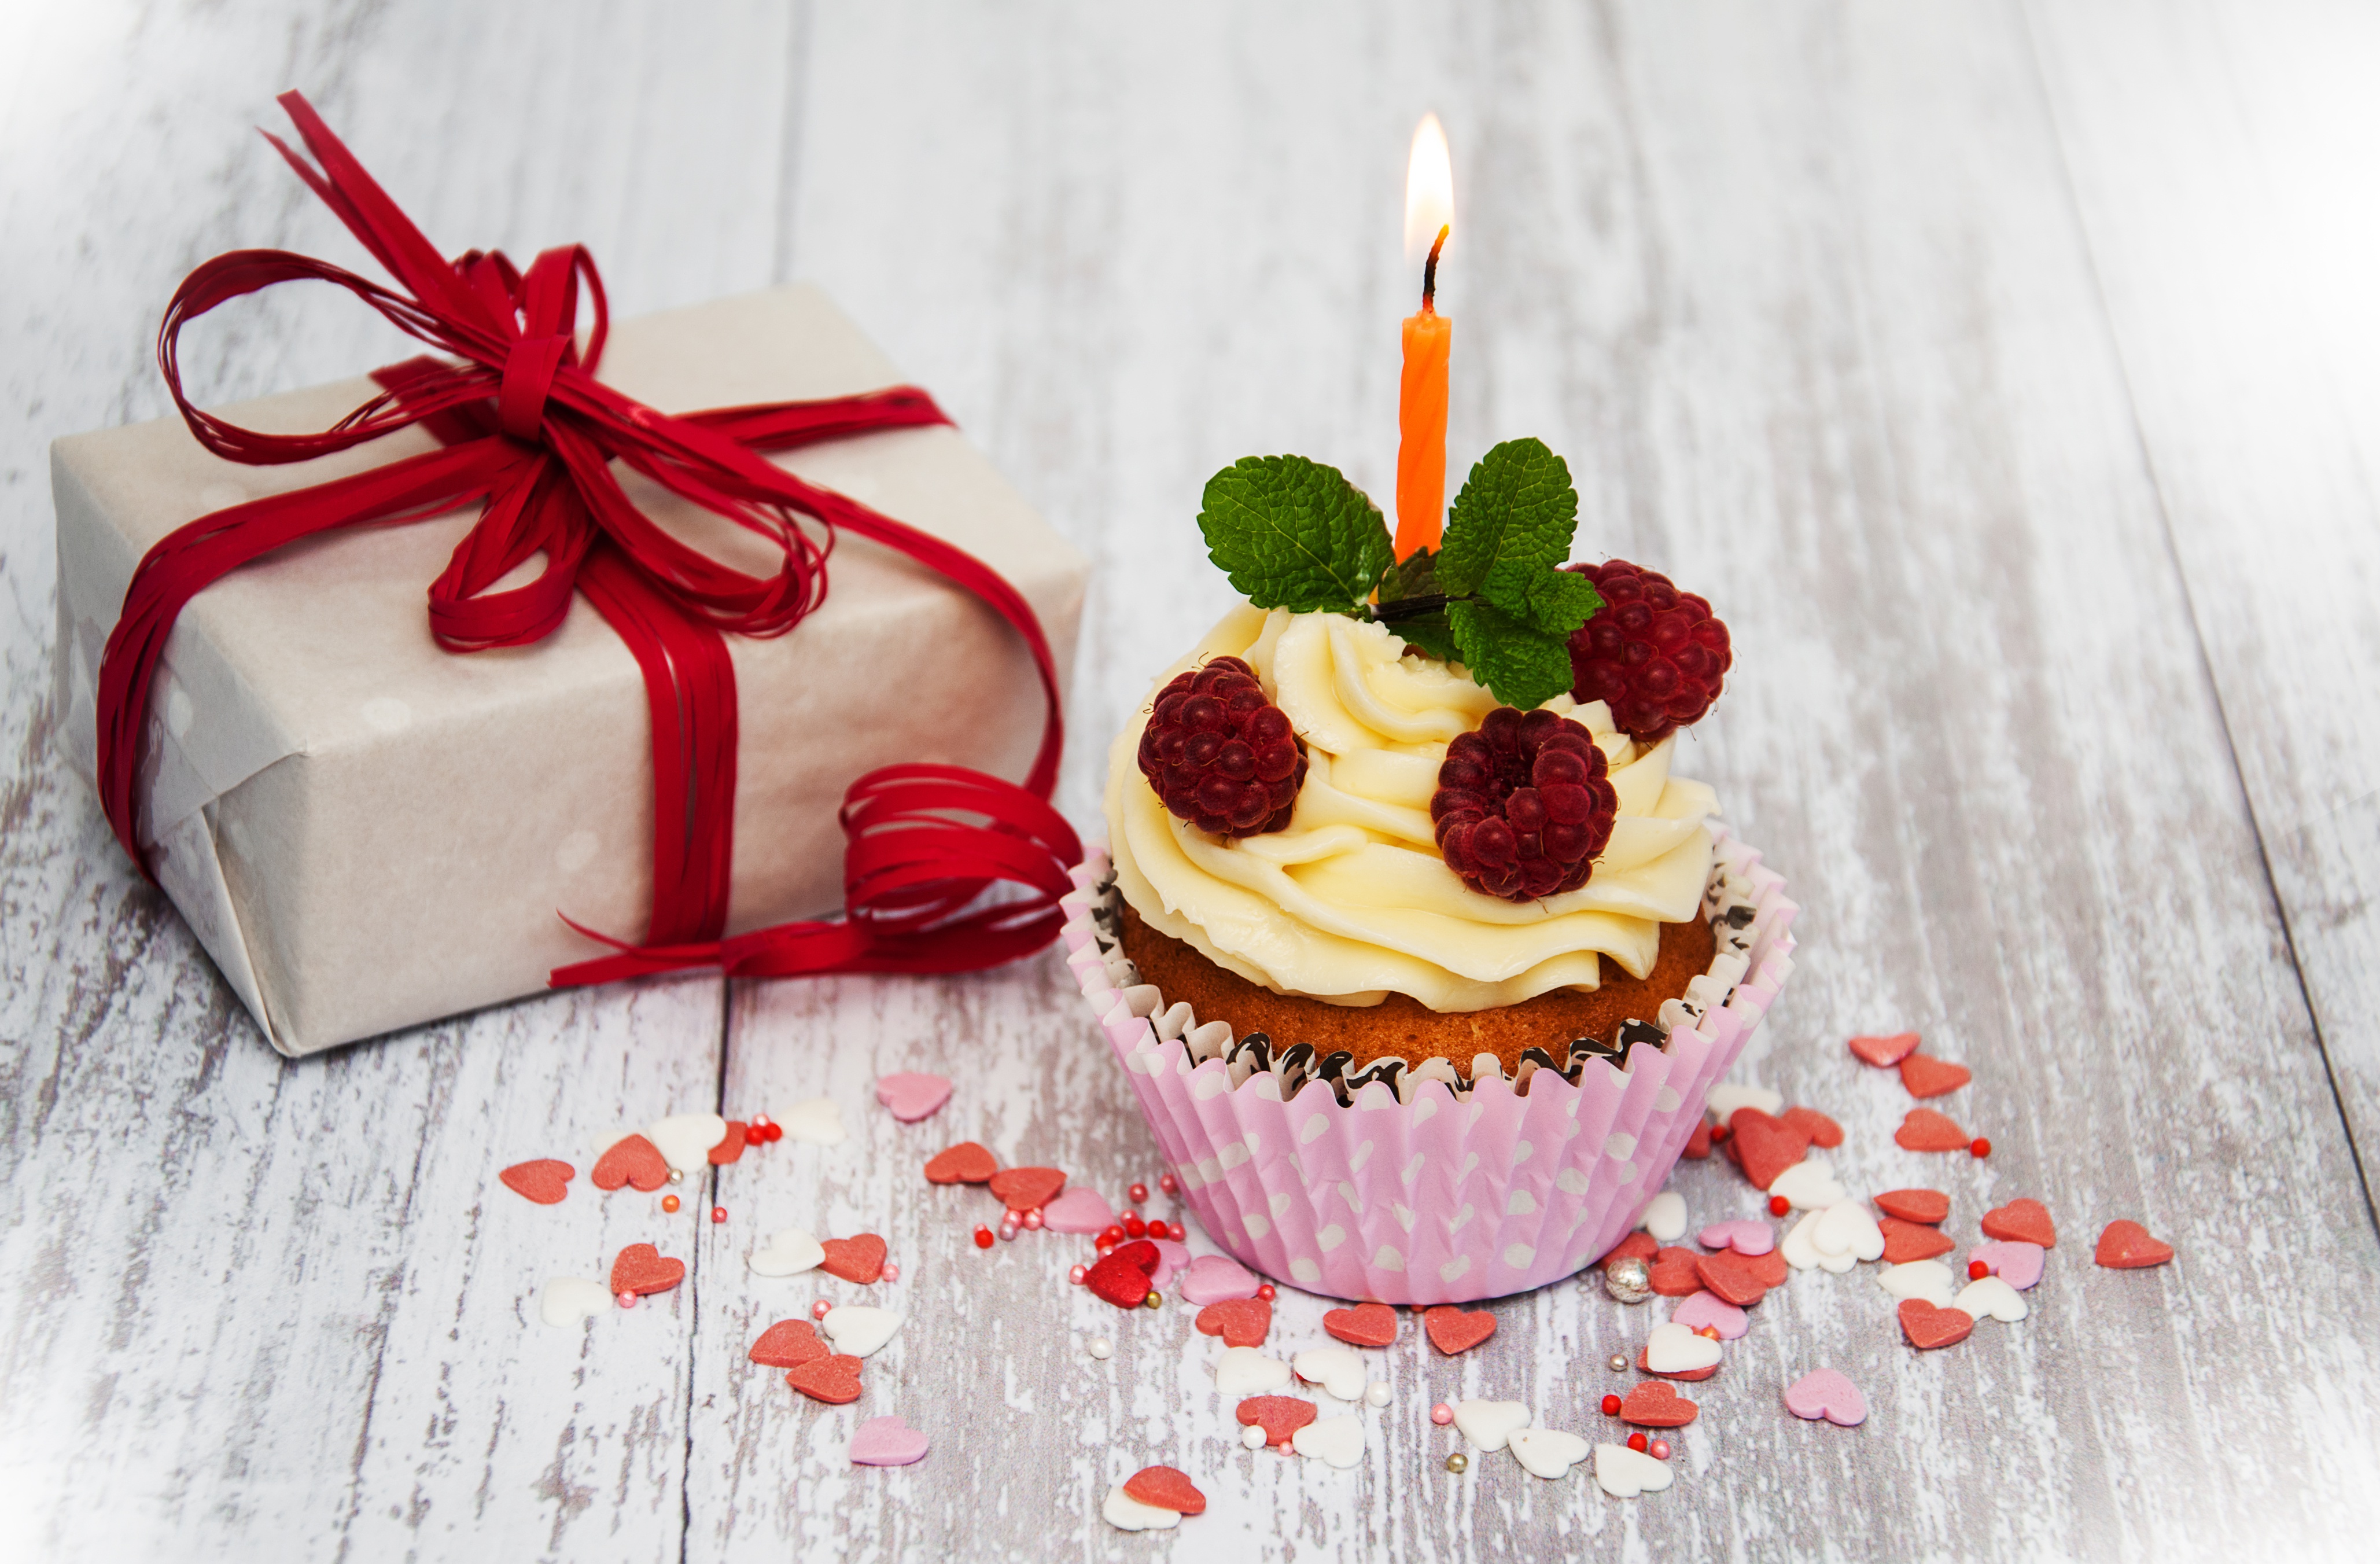 Candle Cupcake Gift Still Life Sweets 4114x2703